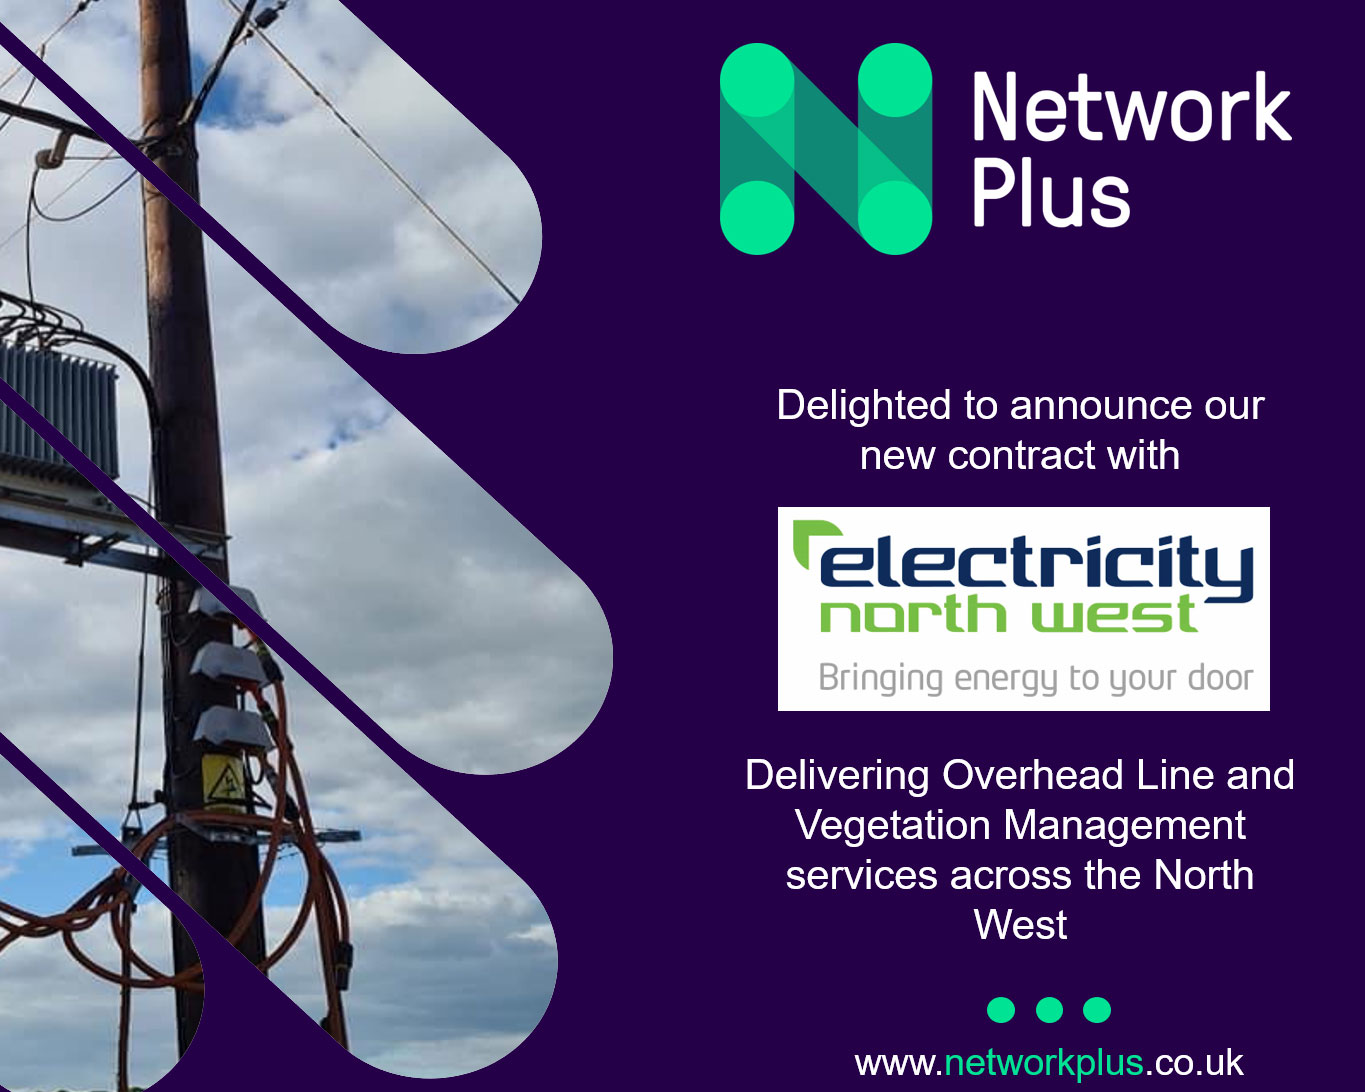 Network Plus awarded a Power contract for Overhead Lines and Vegetation Management by Electricity North West